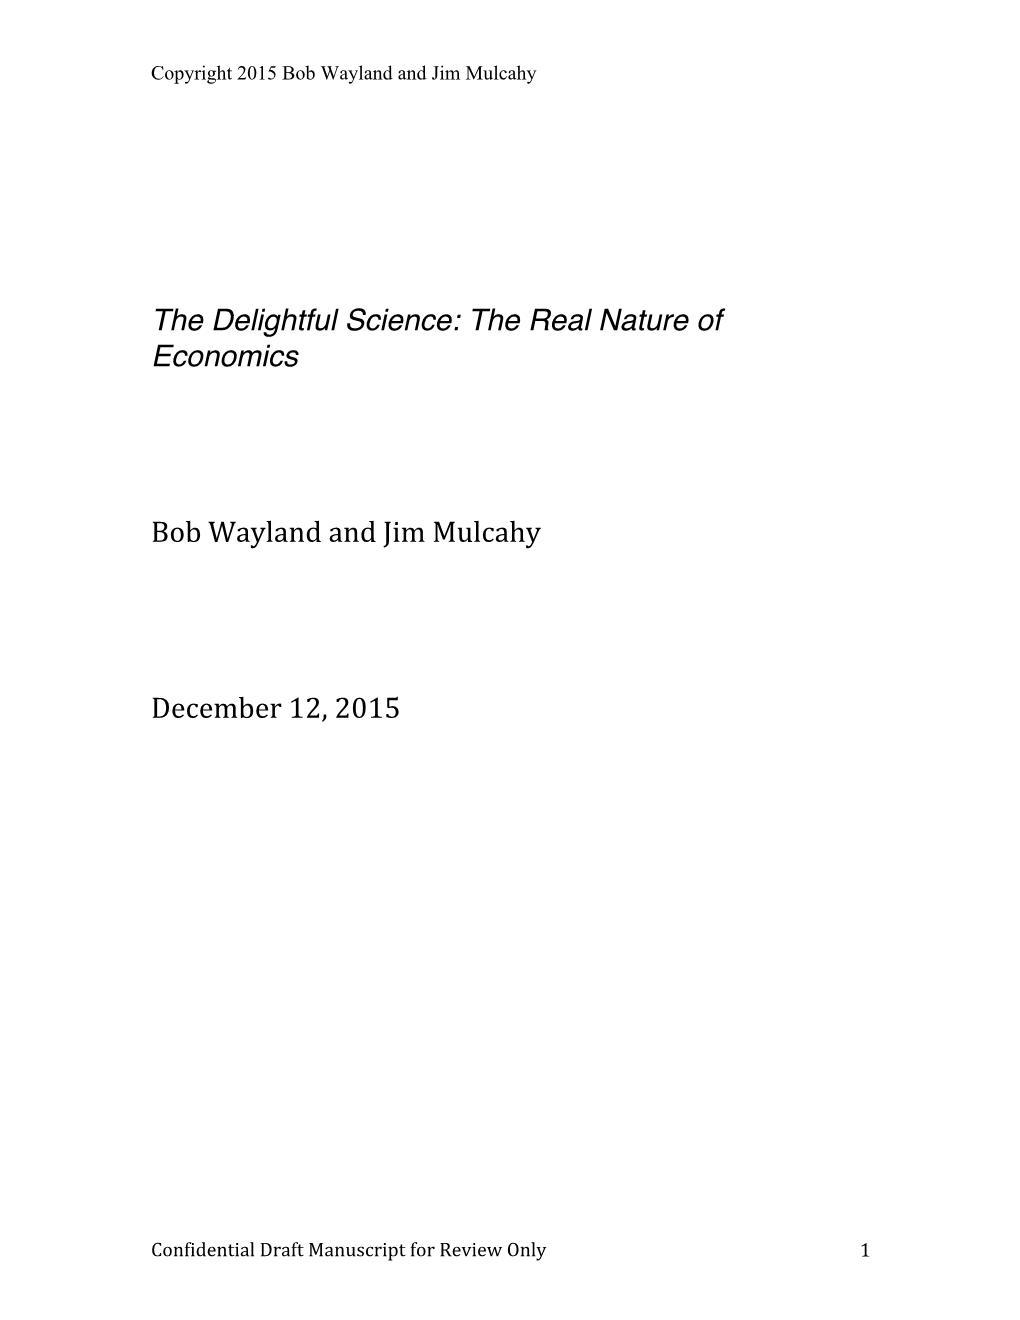 The Delightful Science: the Real Nature of Economics Bob Wayland